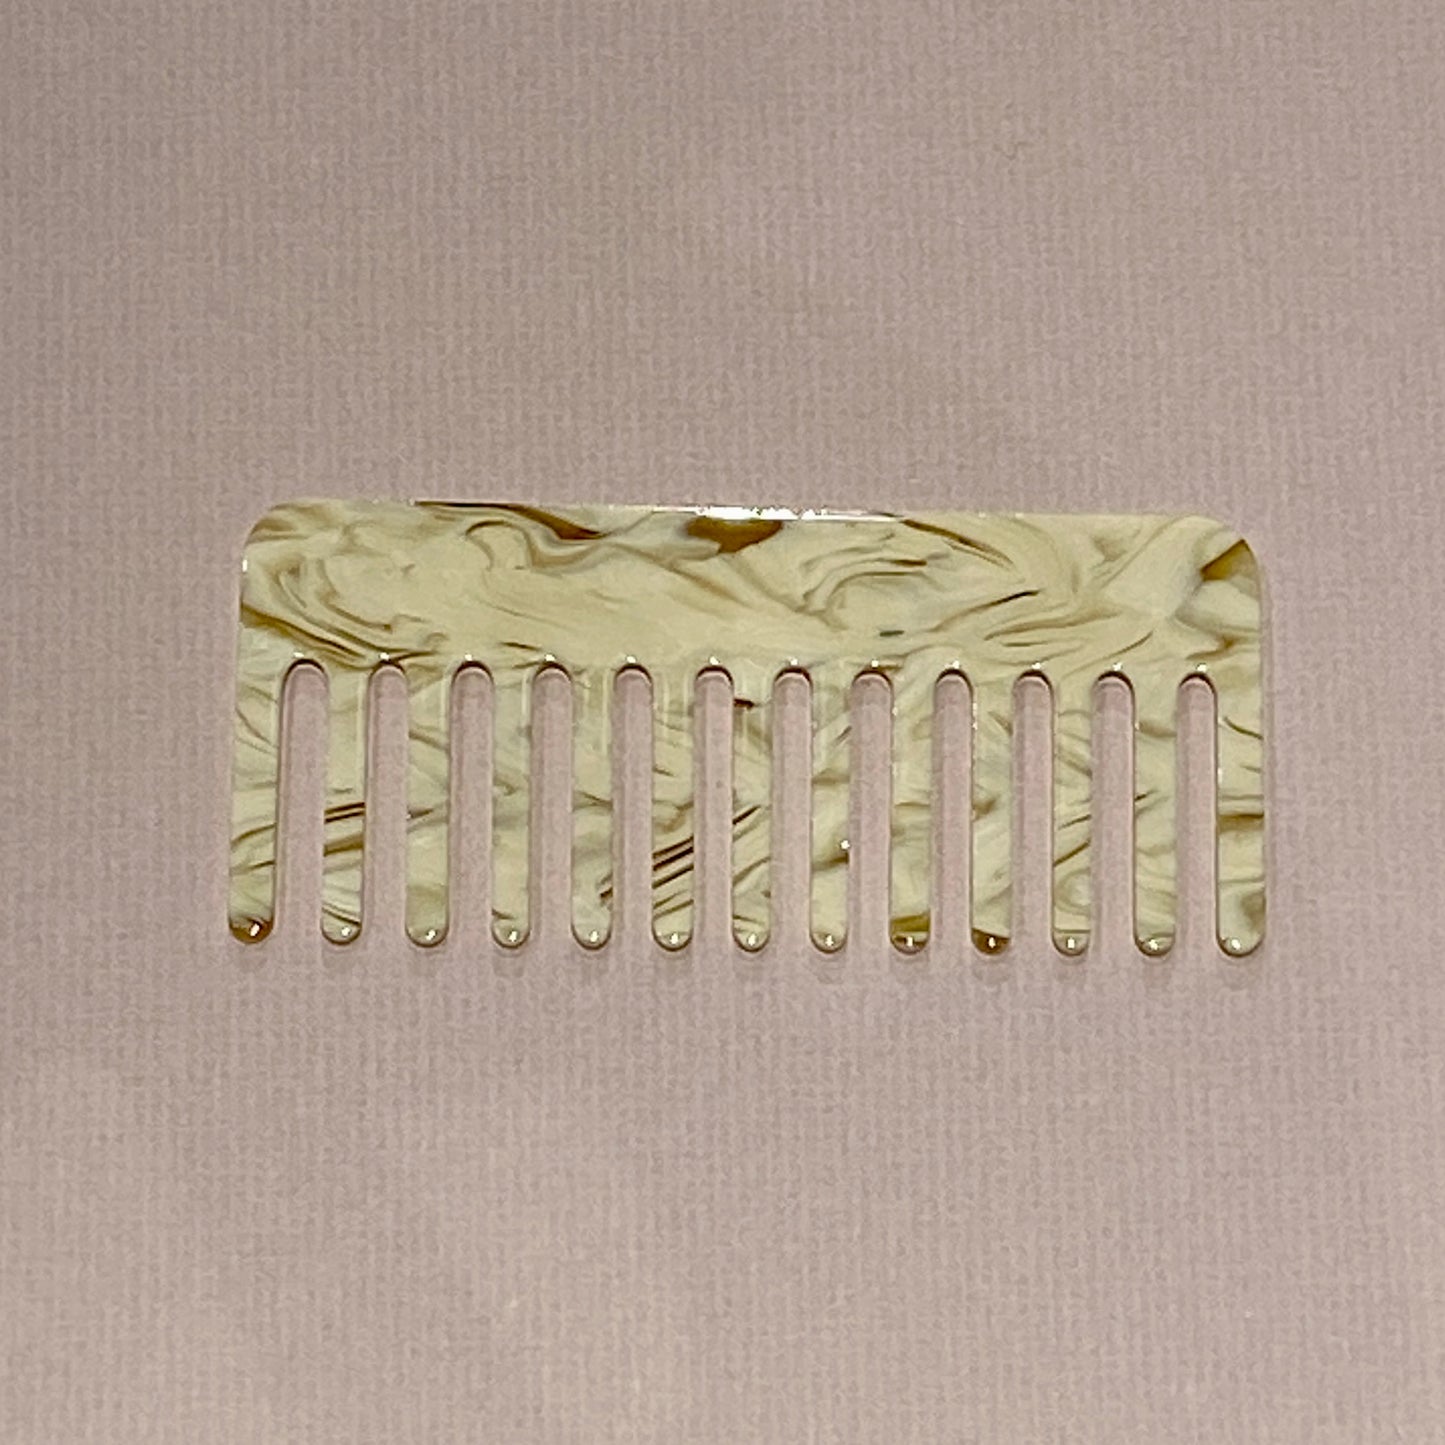 Melted Butter Acetate Comb